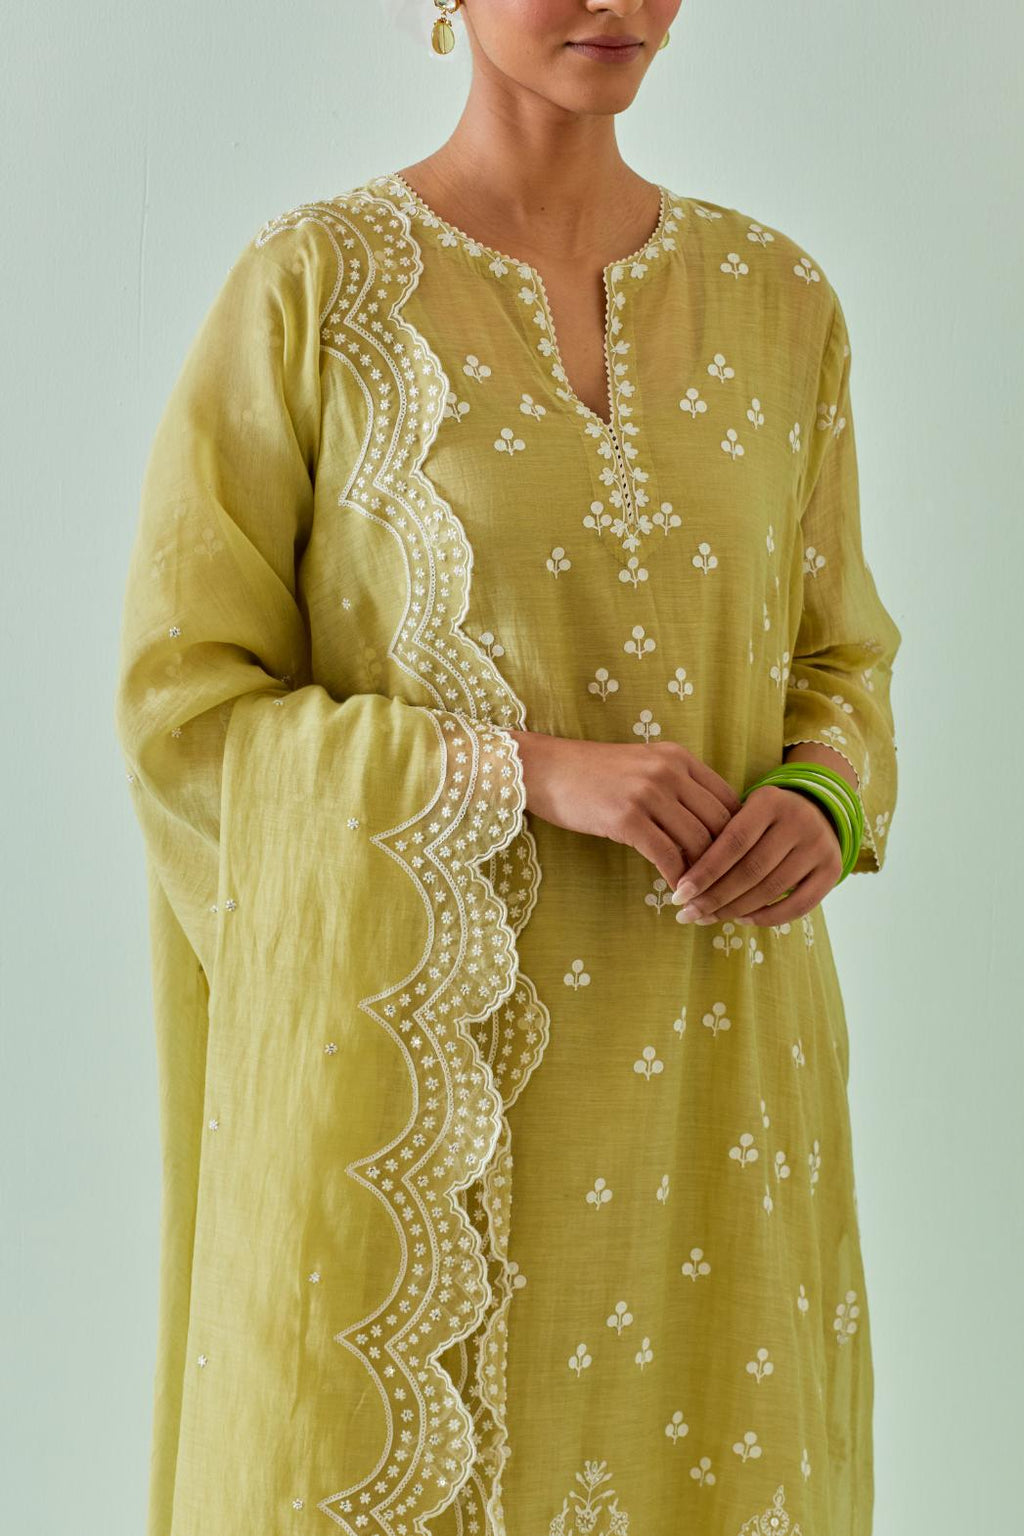 Green kalidar cotton chanderi short kurta set, highlighted with delicate off-white embroidery.